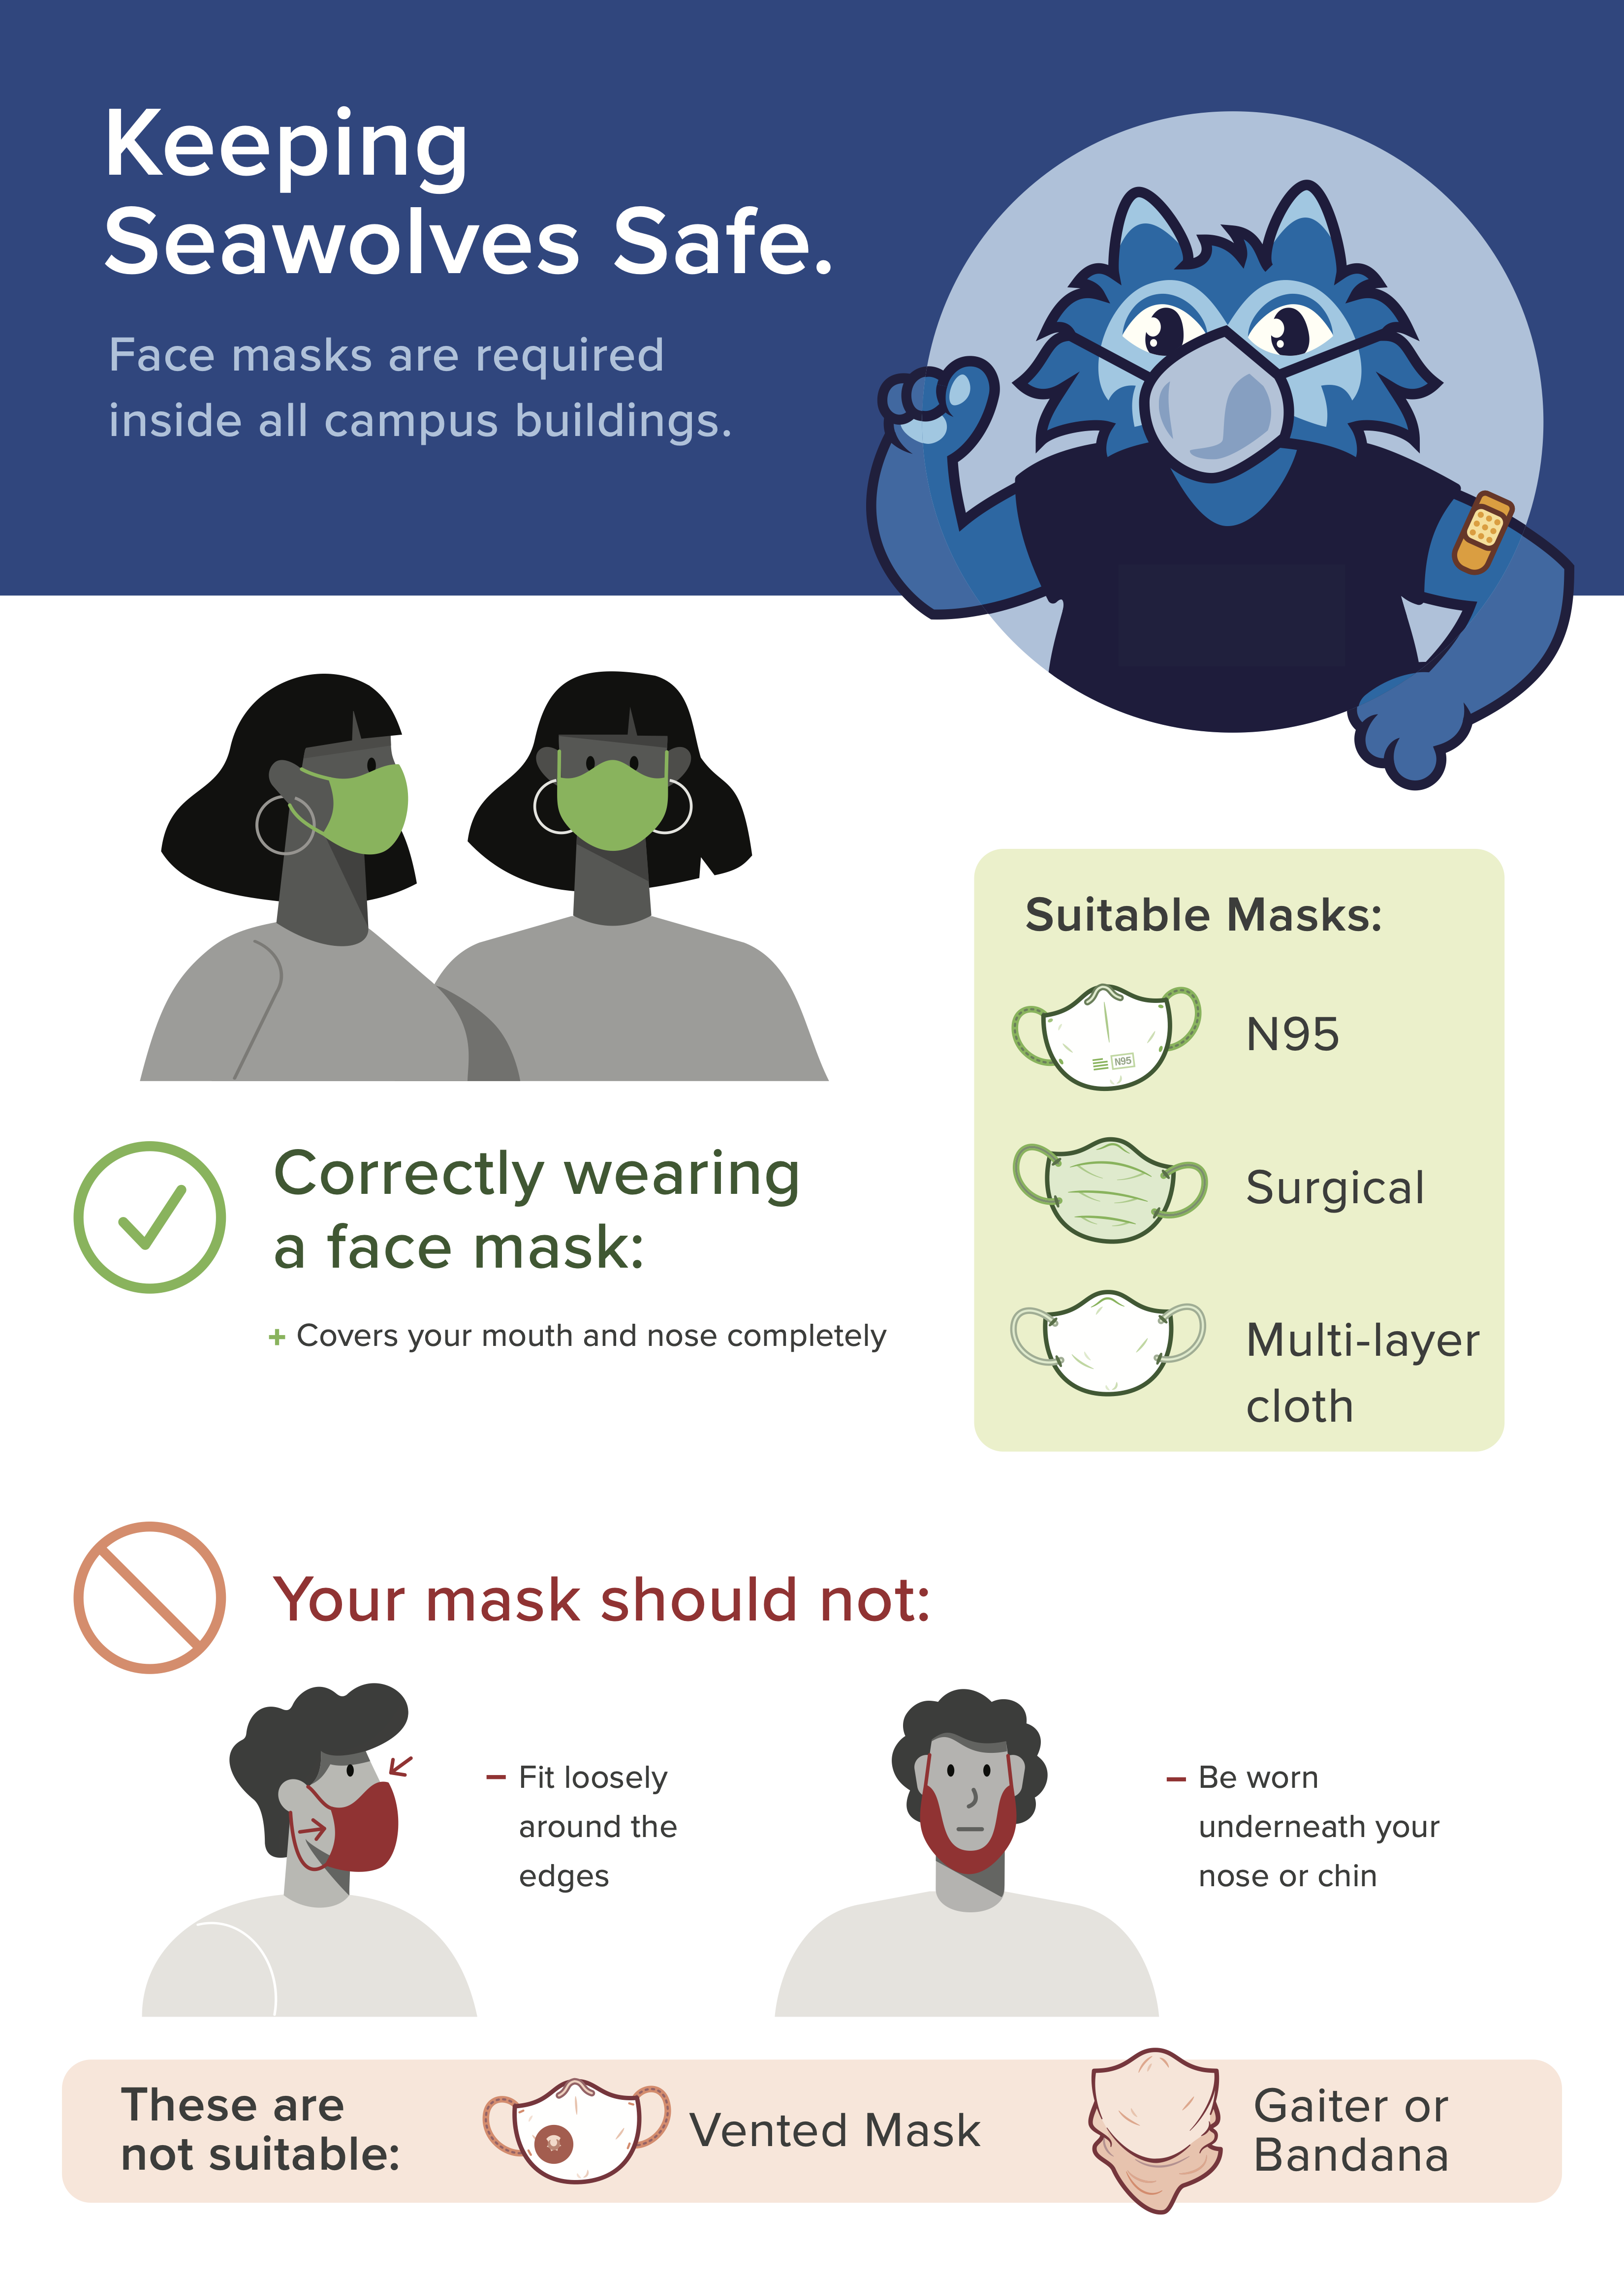 Face masks are required   Sonoma County public health orders require all individuals, regardless of vaccination status, to wear face coverings when indoors in public settings. Masks are proven to be very effective at preventing the circulation of the coronavirus.   INDOORS Masks are required inside ALL campus buildings, except the residence halls. Employees may remove their mask if they are in their private office while the door is closed. Masks may be taken off for brief periods indoors while eating, drinking, or taking oral medications. However, it is recommended that the mask be worn between bites and sips when eating or drinking.   OUTDOORS Masks are not required outdoors, as long as a six-foot physical distance between persons can be maintained.   If you lose or forget to bring a mask to campus, you may pick one up during business hours at the Seawolf Services Center in Salazar Hall or the Student Center.   When worn correctly the face mask should cover your nose and mouth completely.  The mask should not fit loosely around the edges and should not be worn under your nose and chin.  Suitable types of masks are surgical, multi-layer cloth, and N95.  Bandanas, gaiters, or vented masks are not suitable.